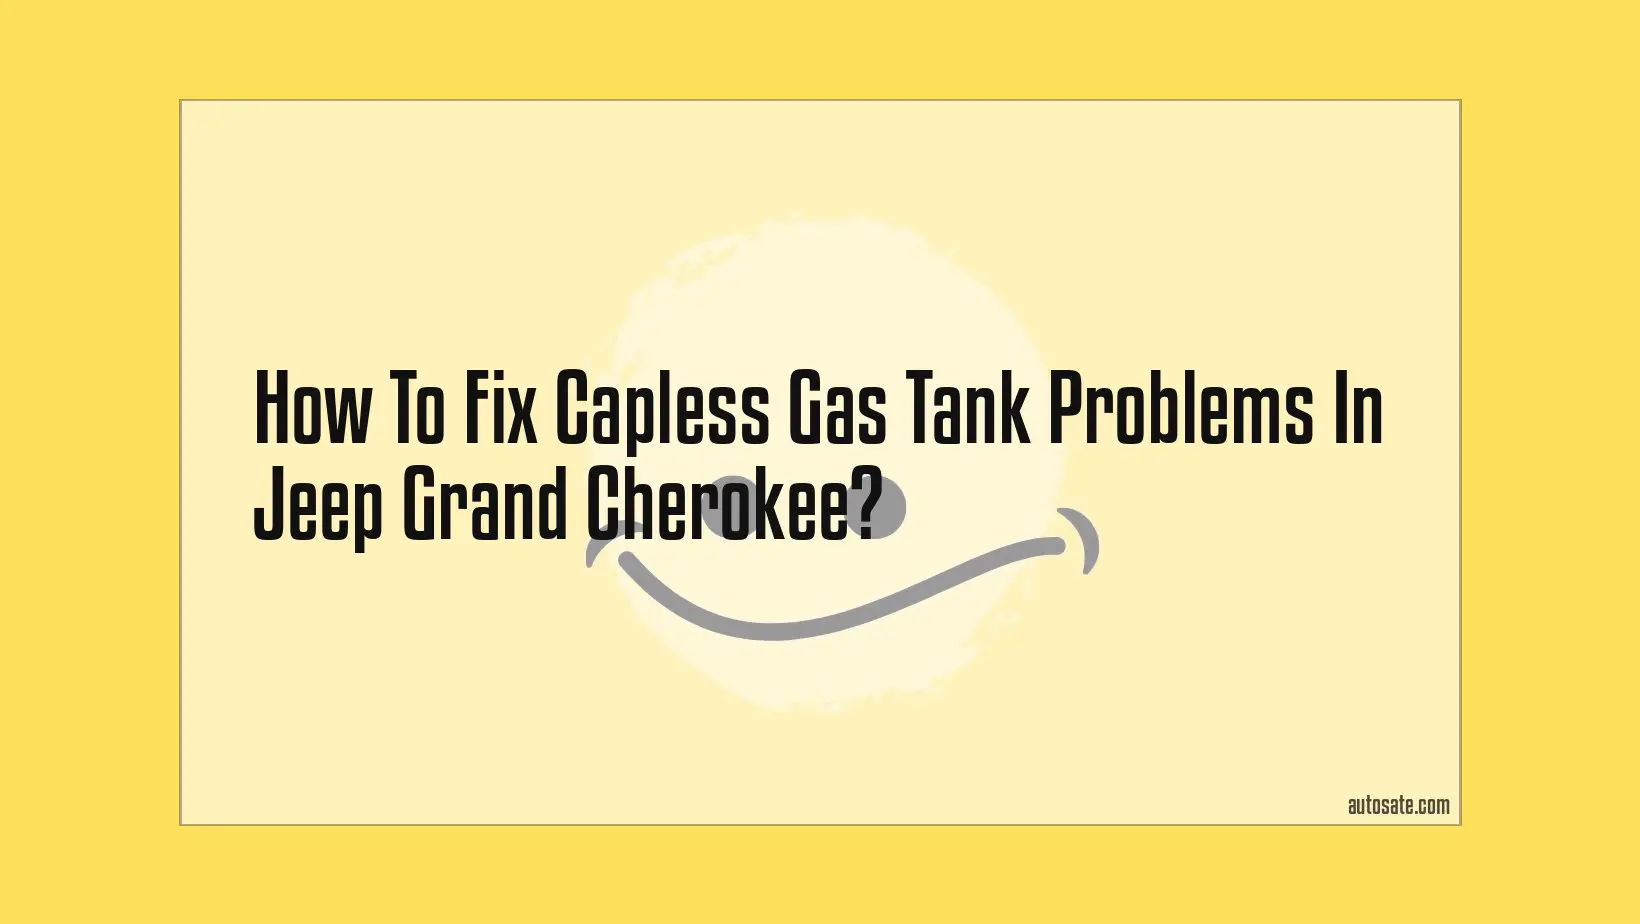 How To Fix Capless Gas Tank Problems In Jeep Grand Cherokee